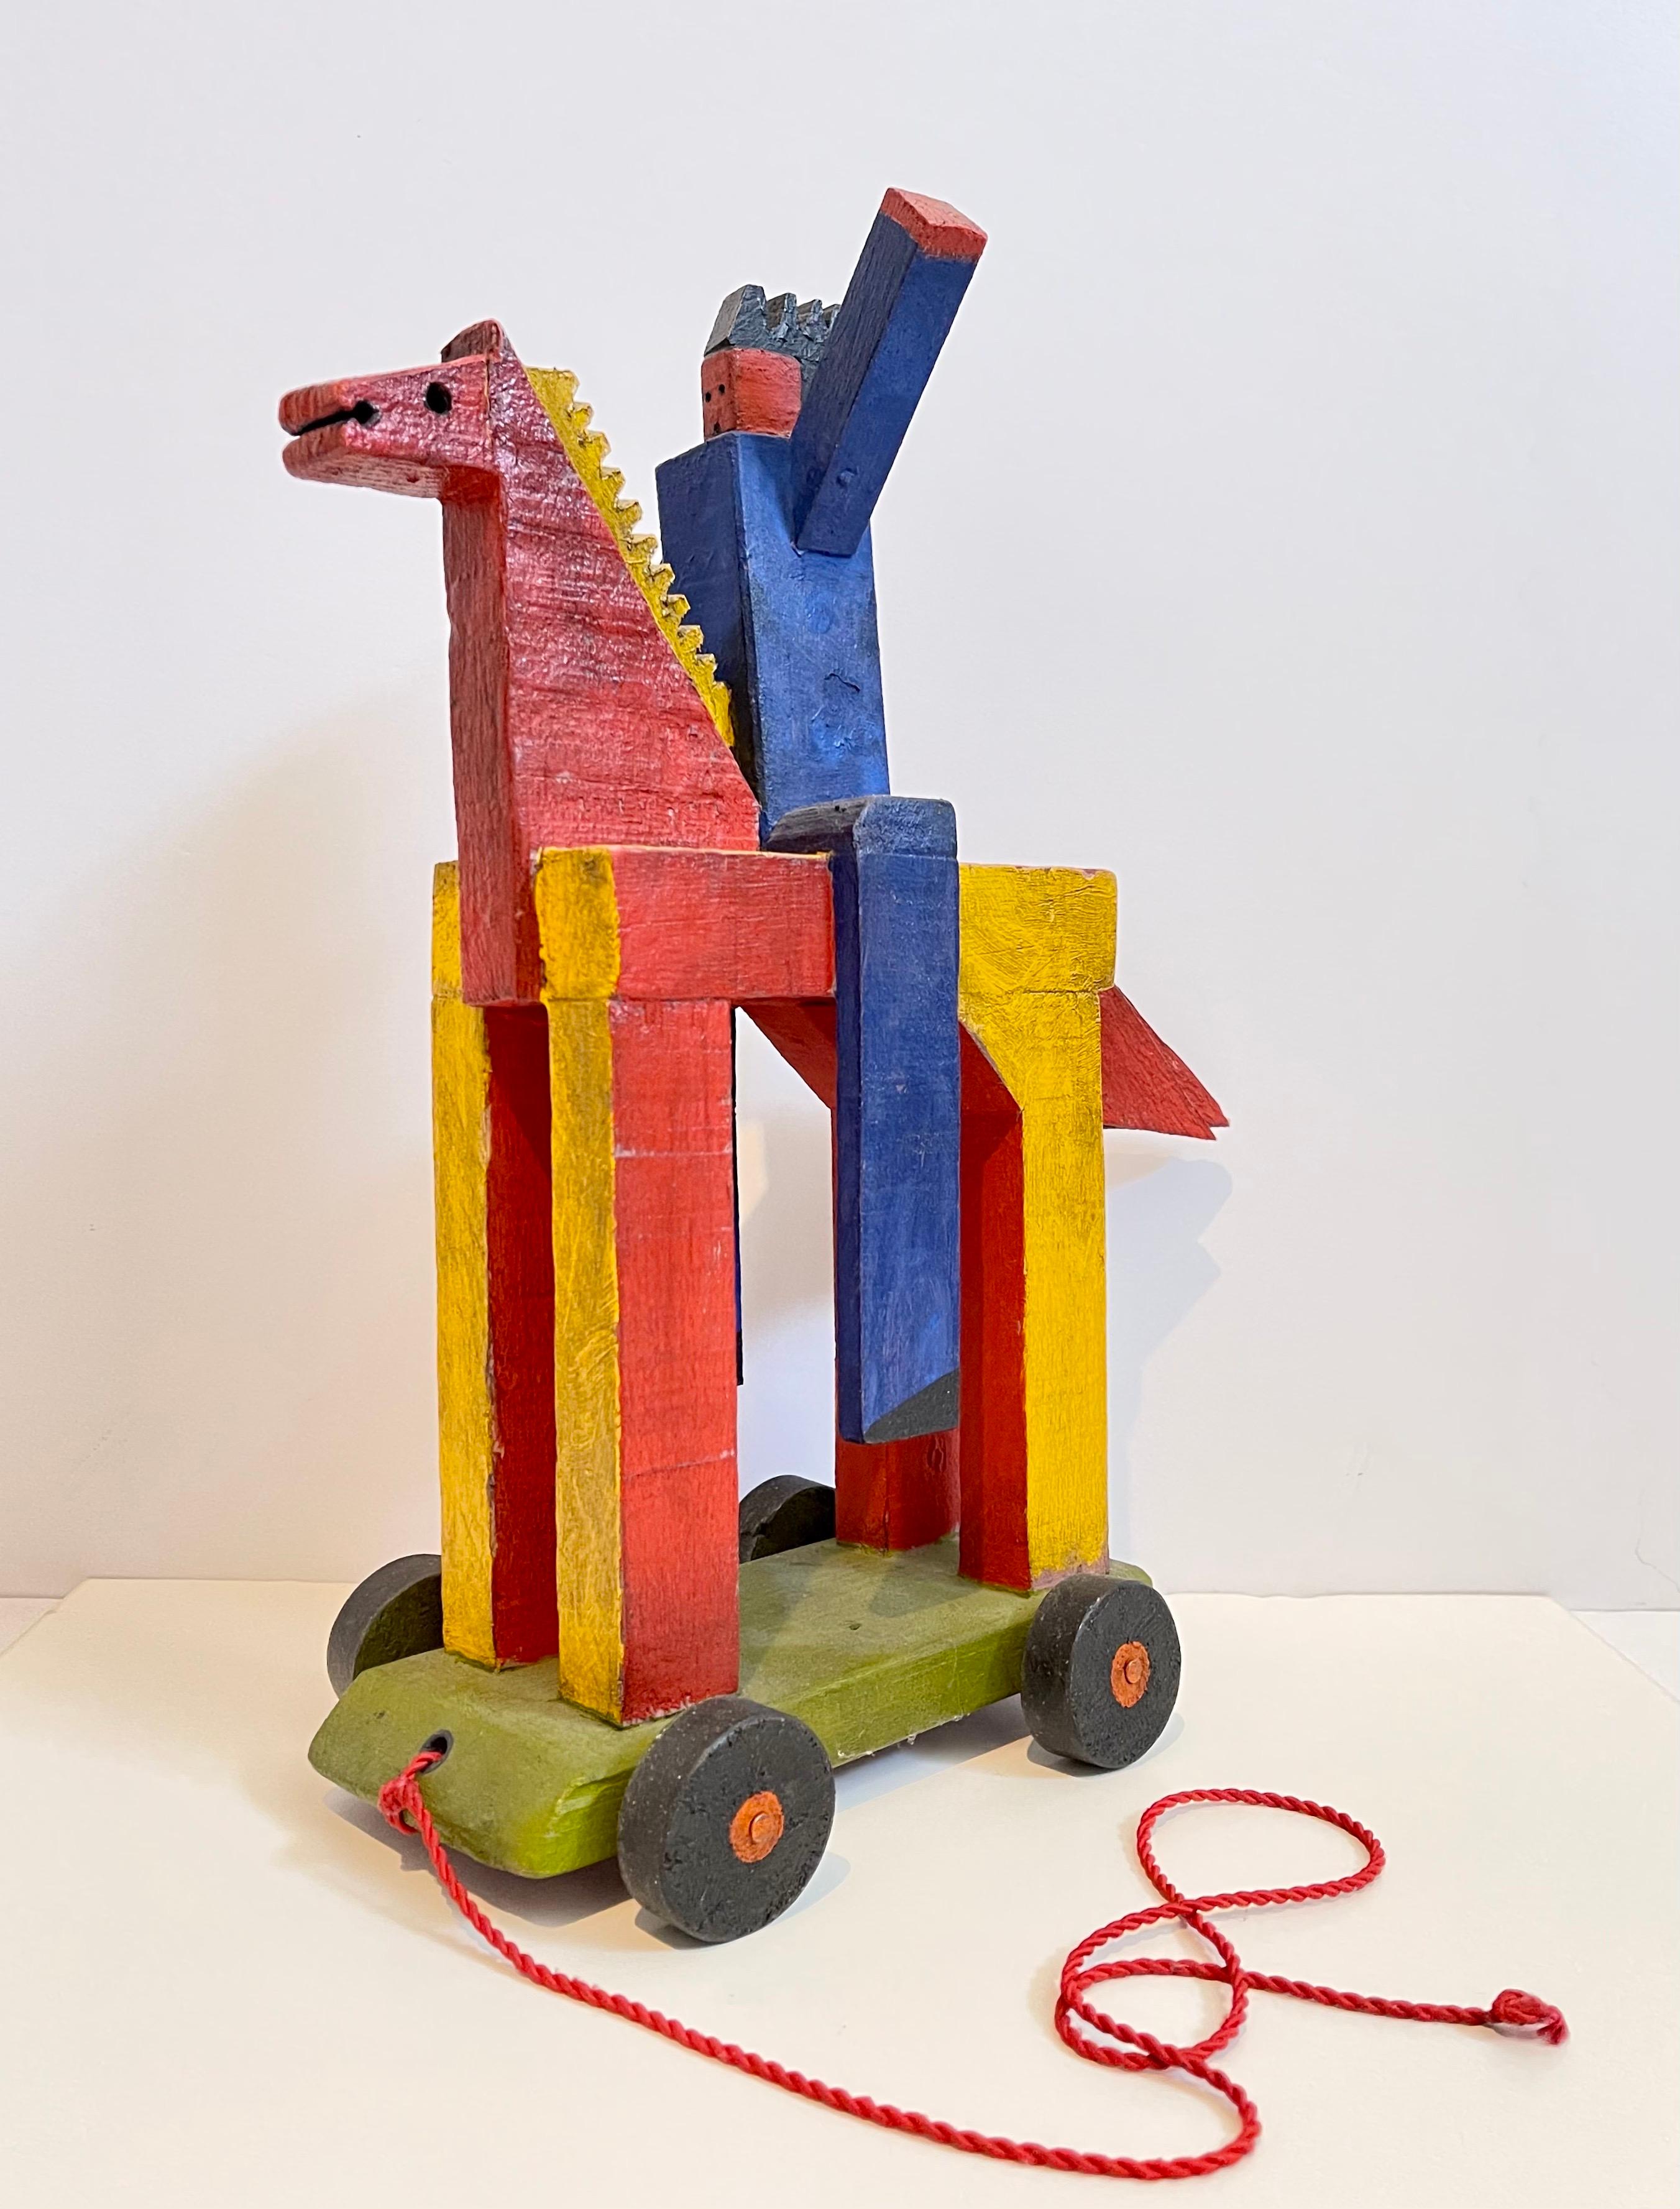 Blas Castagna Hand Painted Wooden Constructivist Sculpture Toy Horse Carved Wood For Sale 1